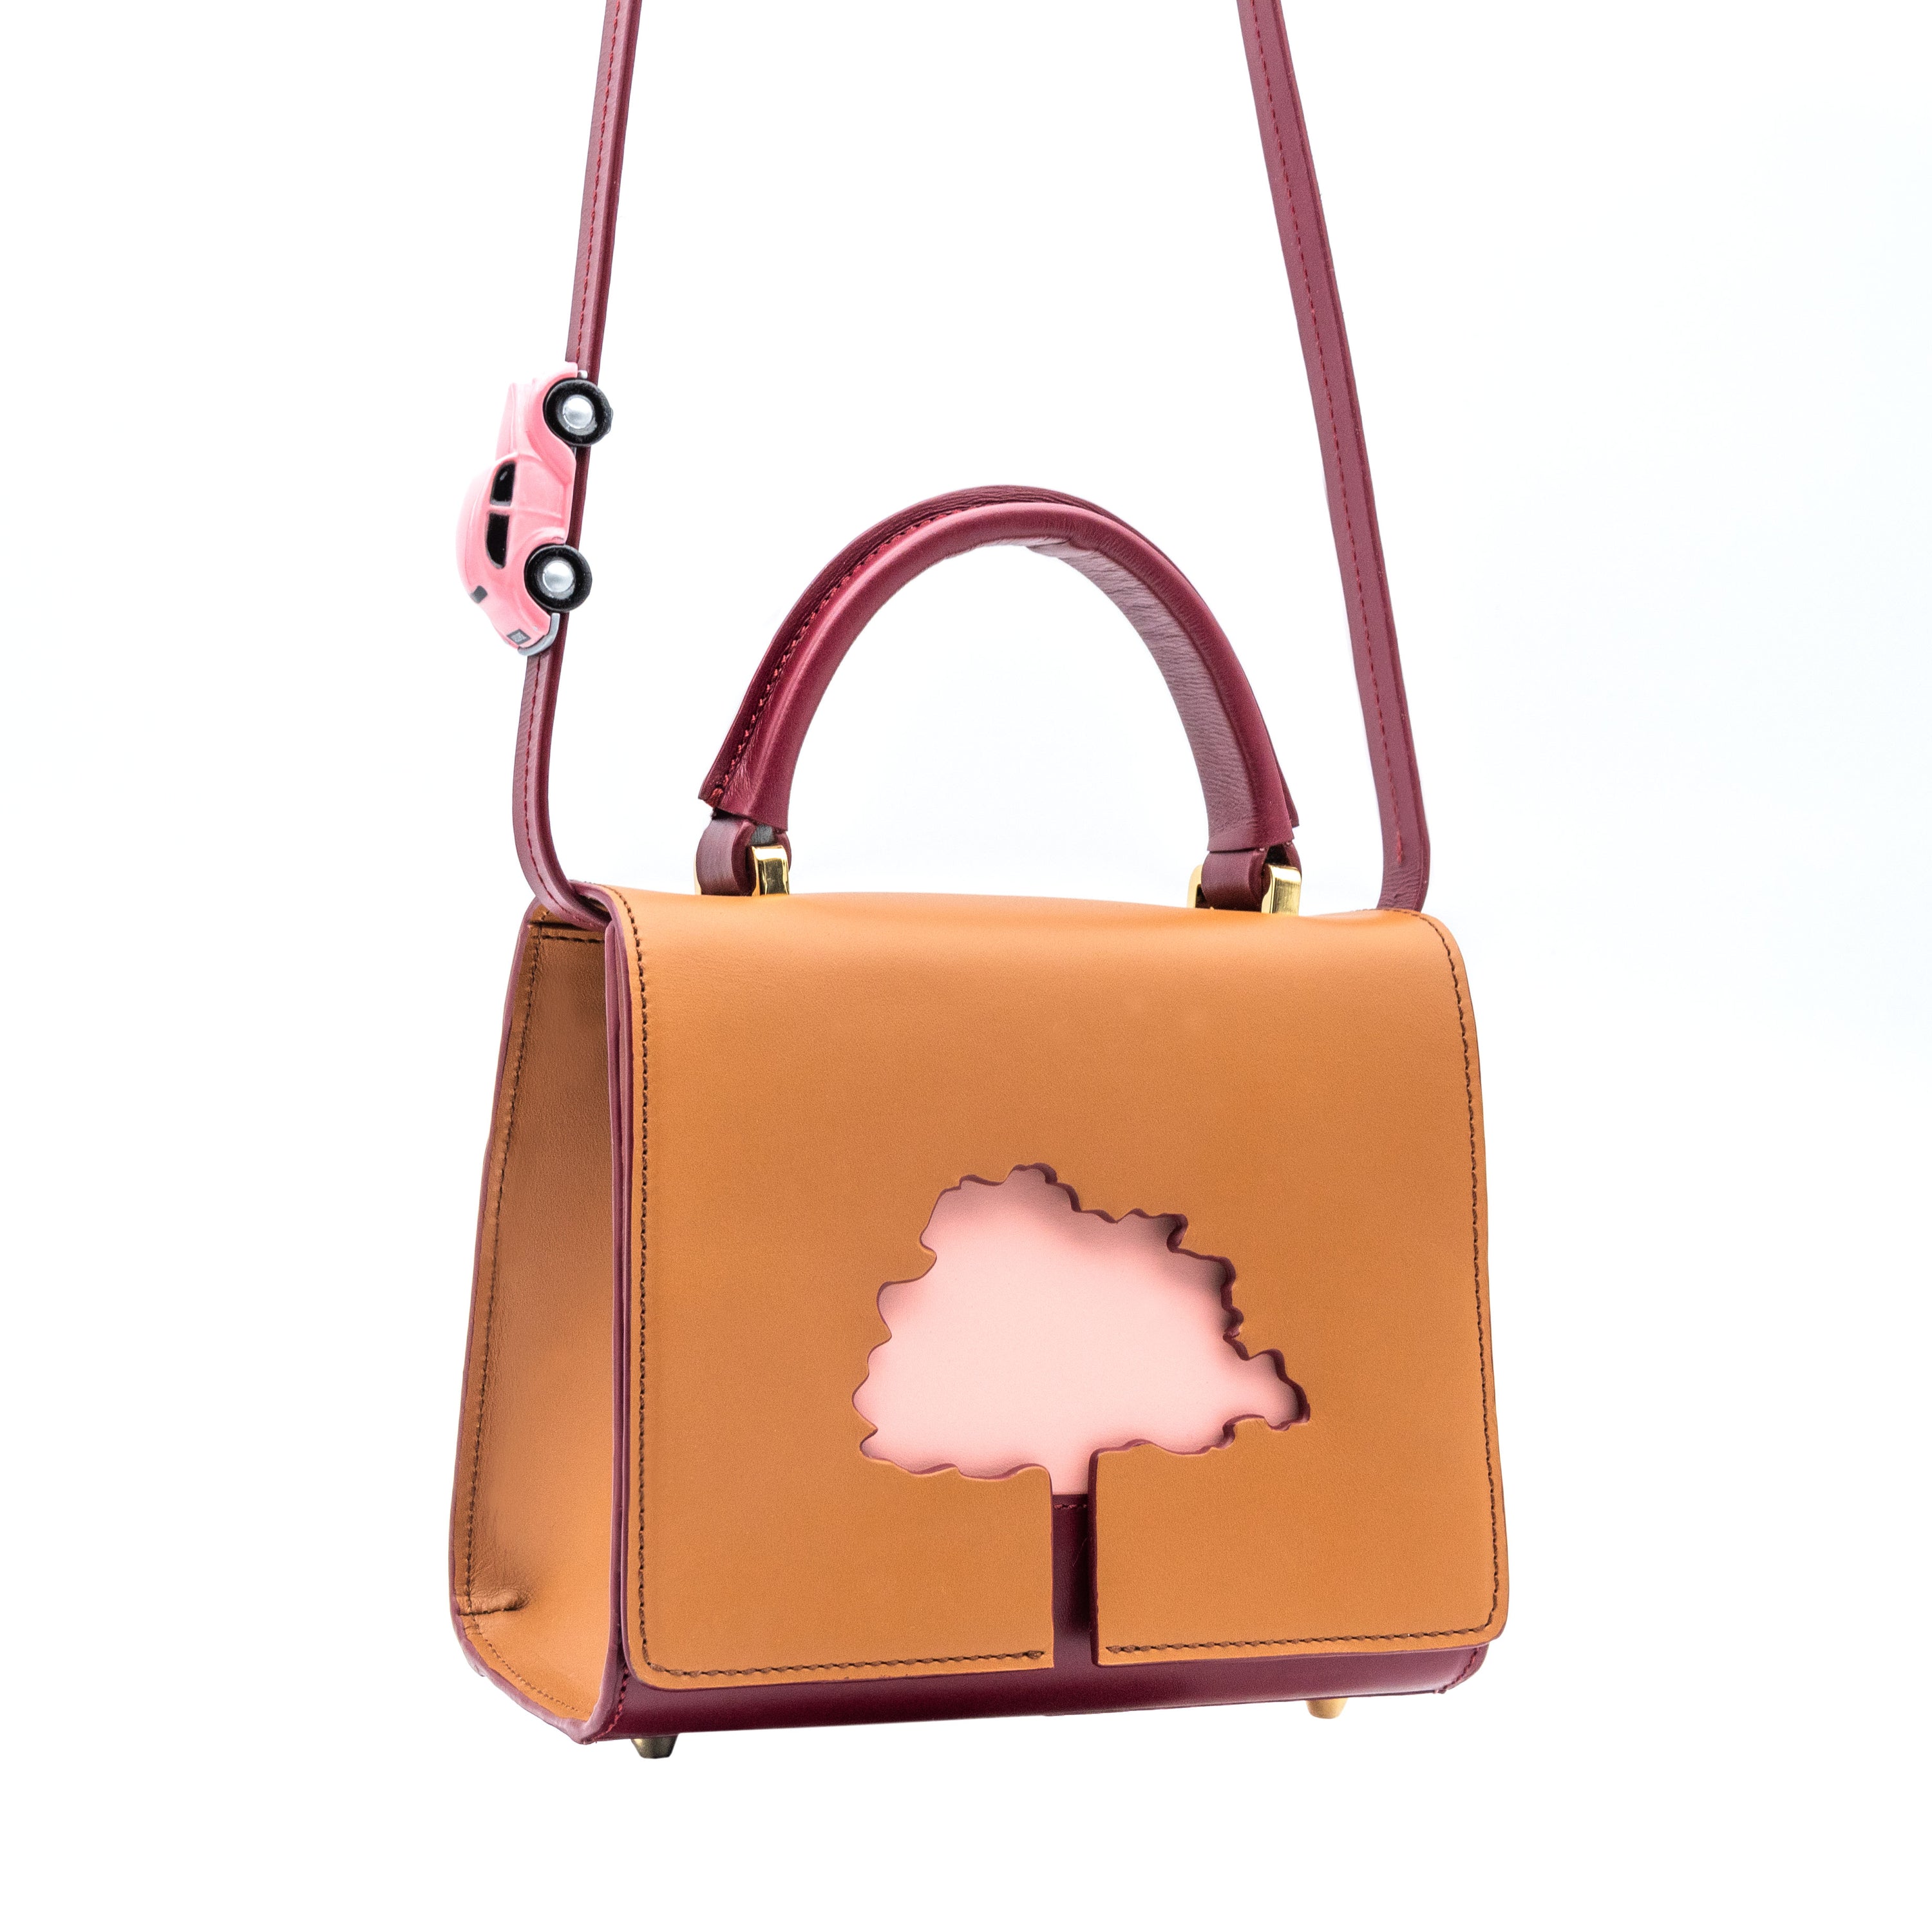 ONE WAY Beige small leather shoulder bag